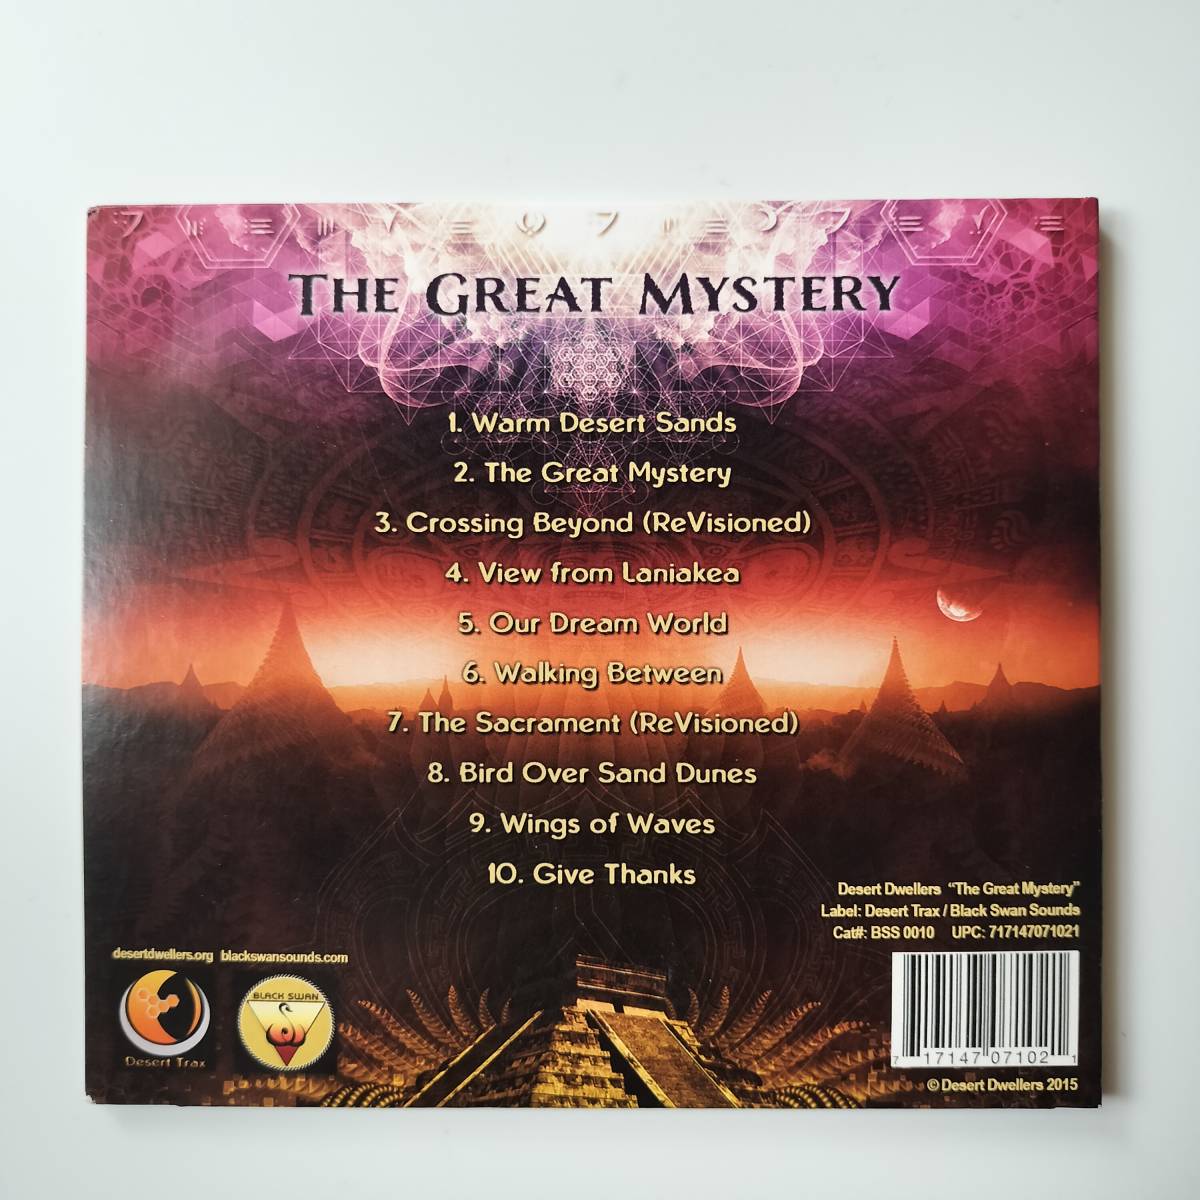 Desert Dwellers-THE GREAT MYSTERY 2015 BSS 0010 Black Swan Sounds trival trance ambient downtempo_画像2